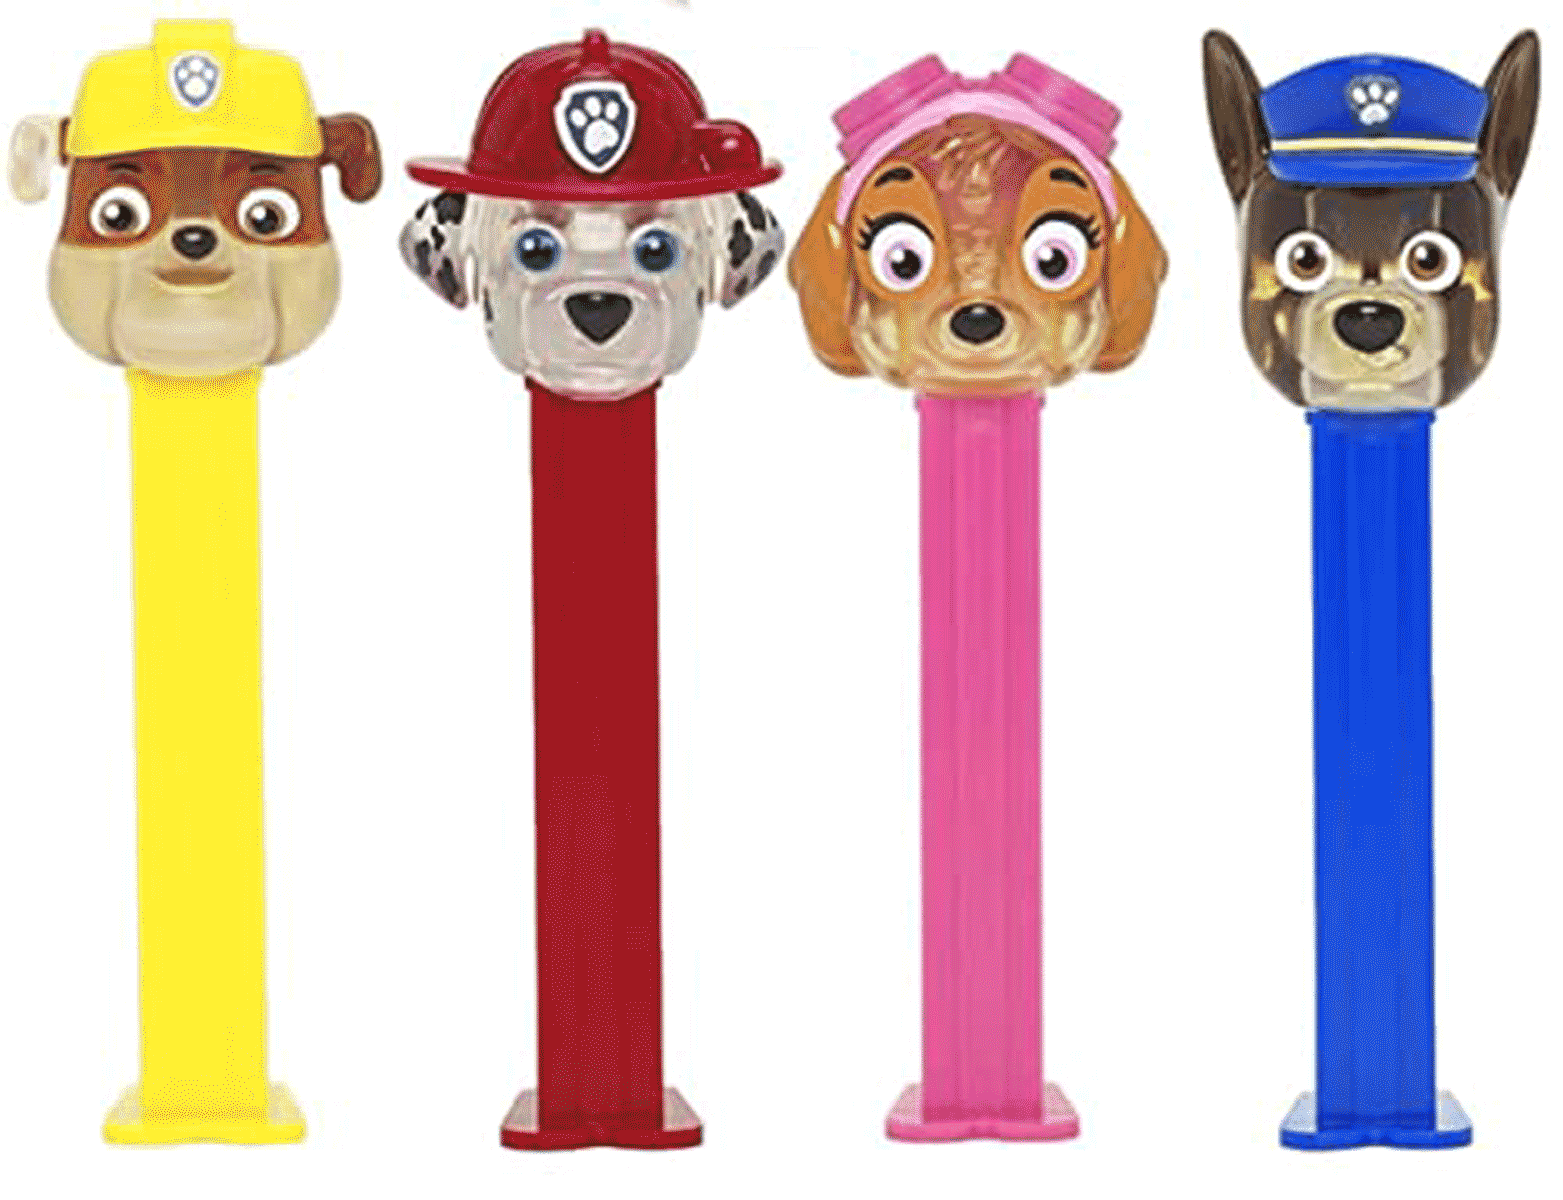 Various NEW PEZ Paw Patrol Candy & Dispenser Buy 5 and get 2 free!! 